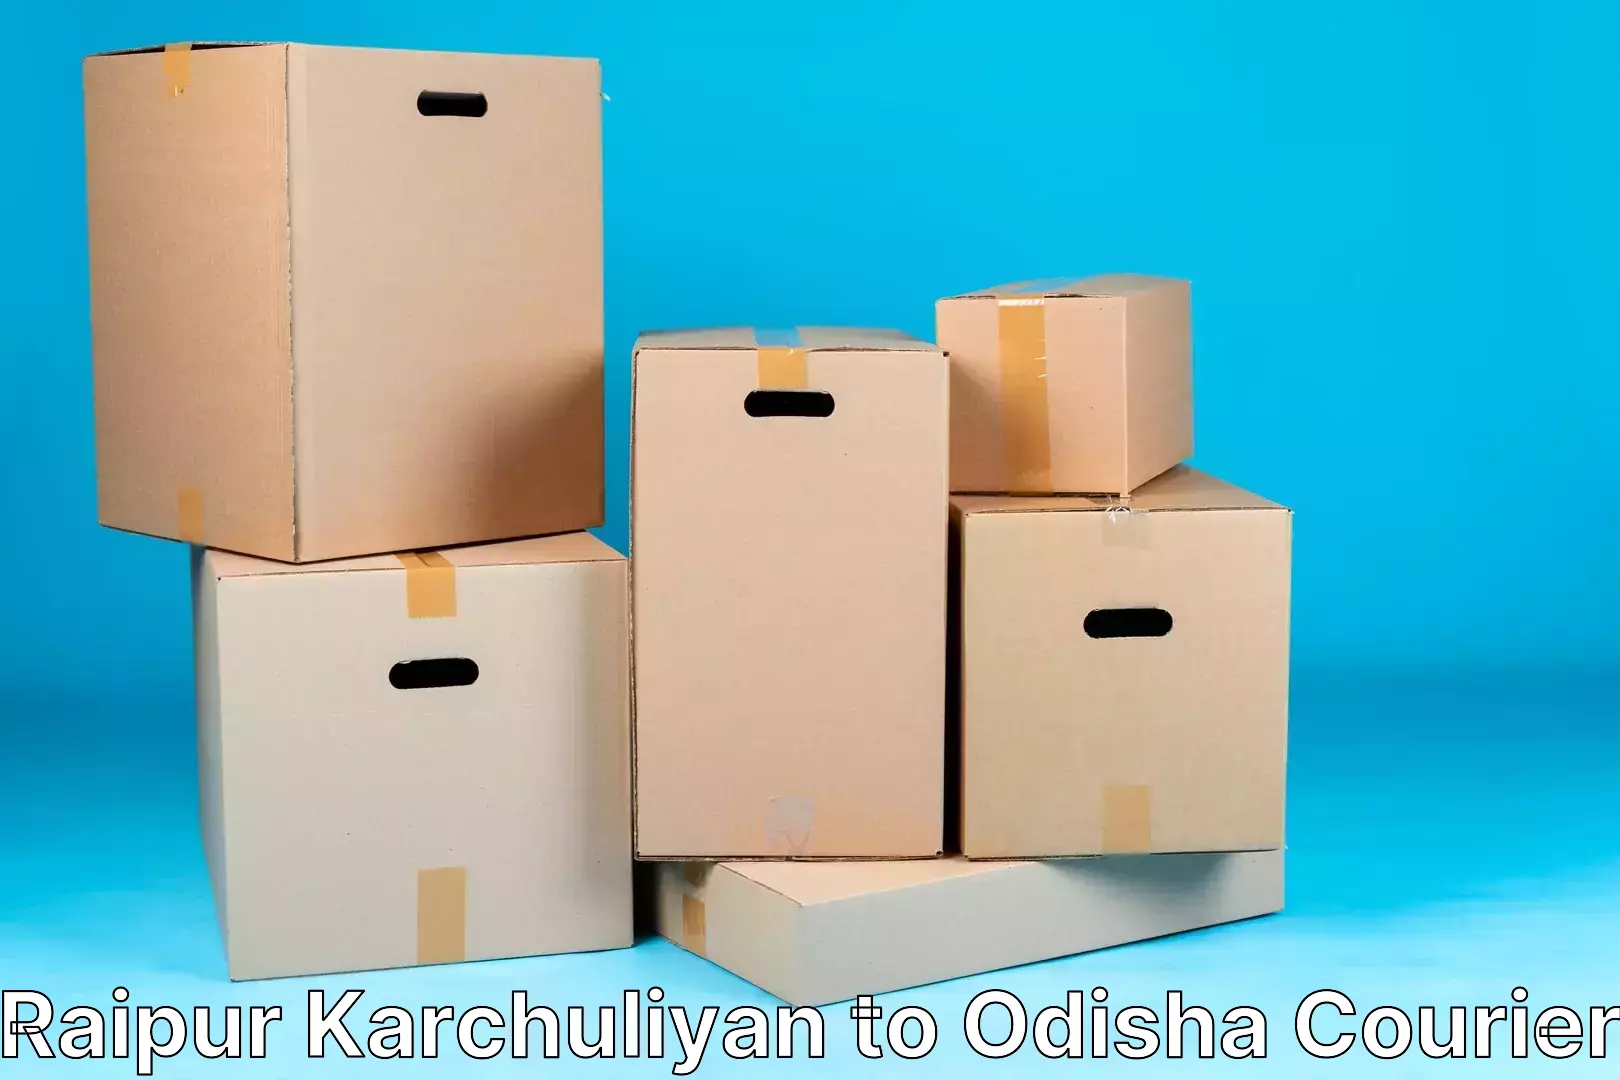 Parcel delivery automation Raipur Karchuliyan to Odisha